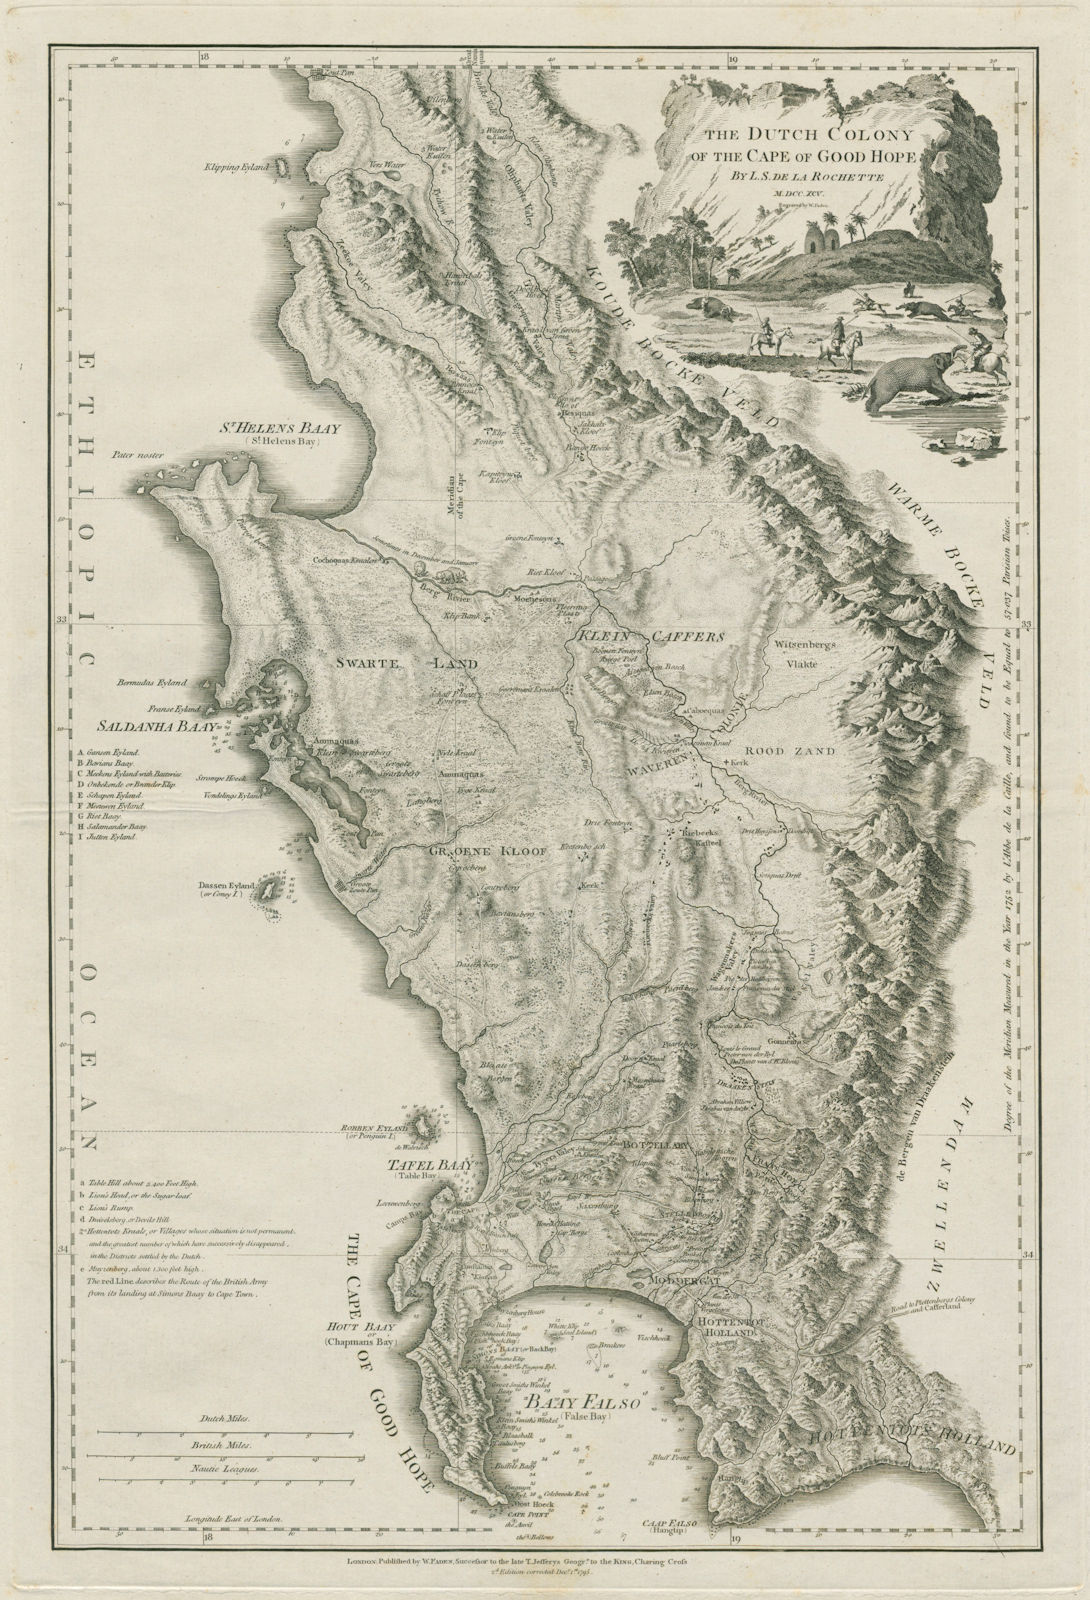 The Dutch colony of the Cape of Good Hope. South Africa Cape Town FADEN 1795 map